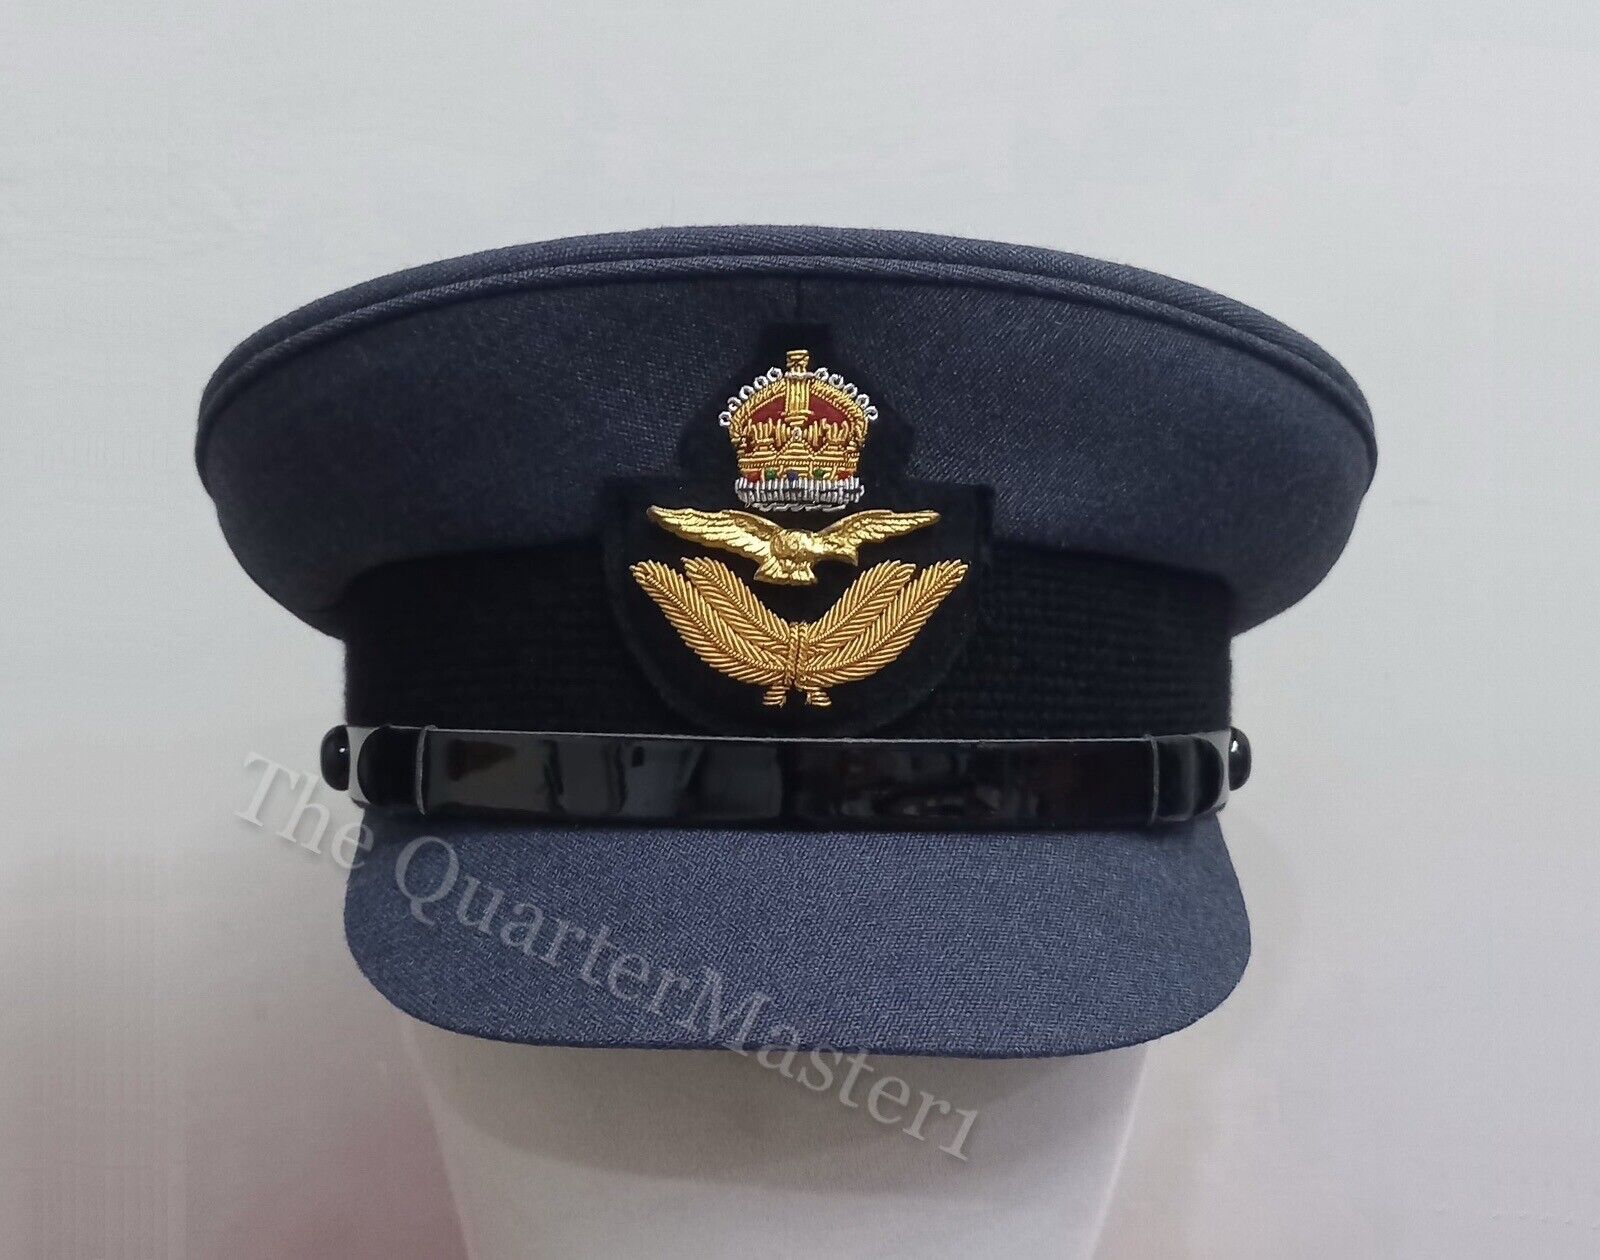 RAF Royal Air force officer No:1 dress Cap/ Hat with RAF King's III Crown Badge